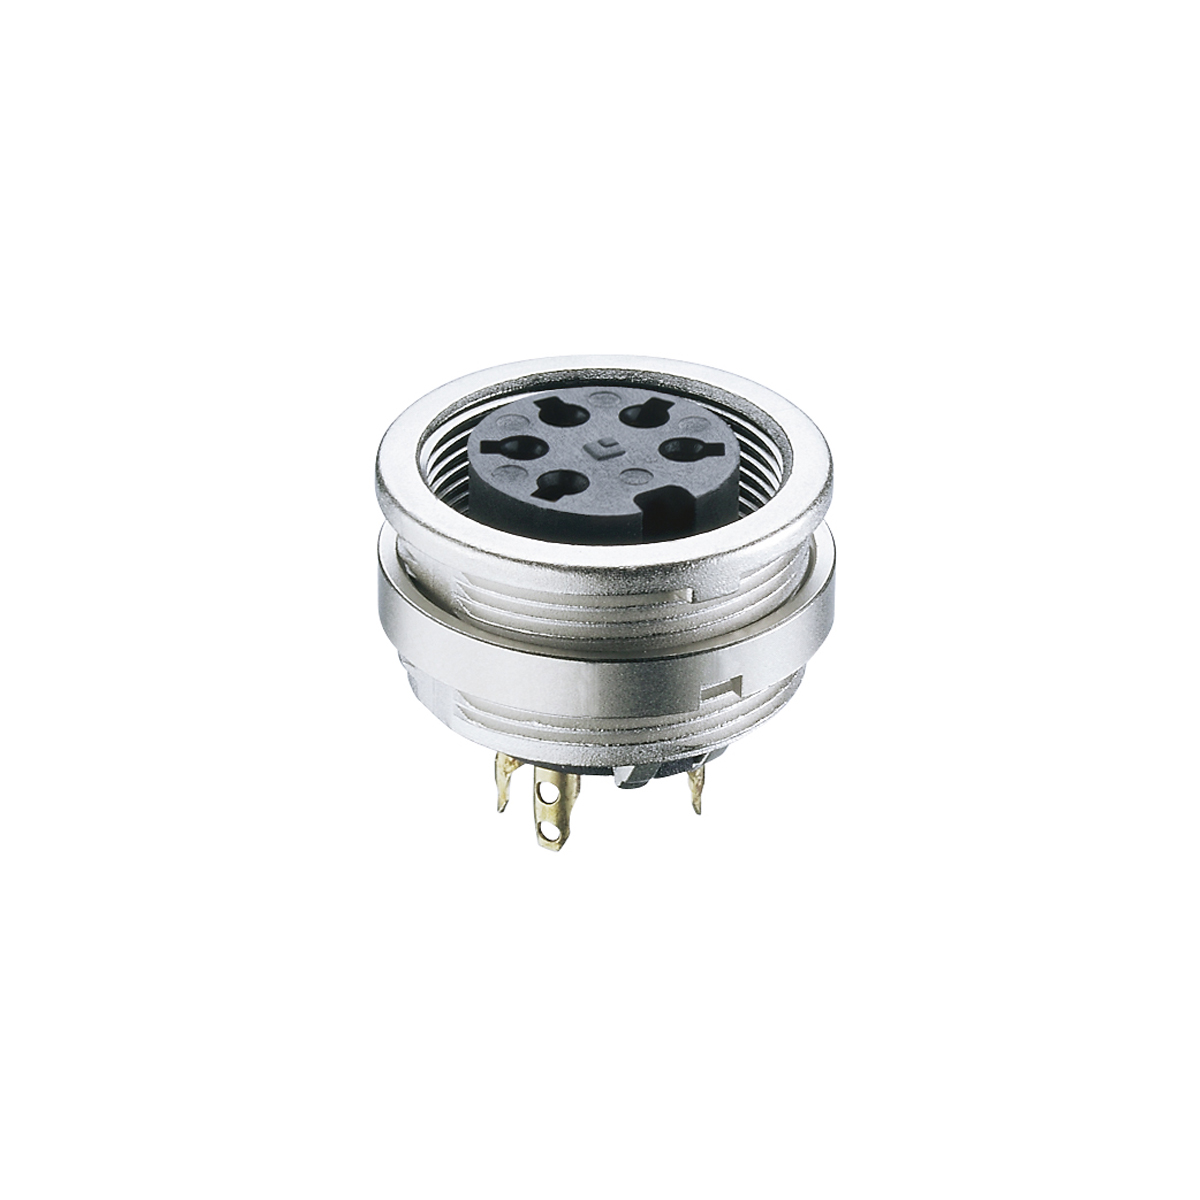 Lumberg: KFV (Series 03 | Circular connectors with threaded joint M16 acc. to IEC 61076-2-106, IP40/IP68)